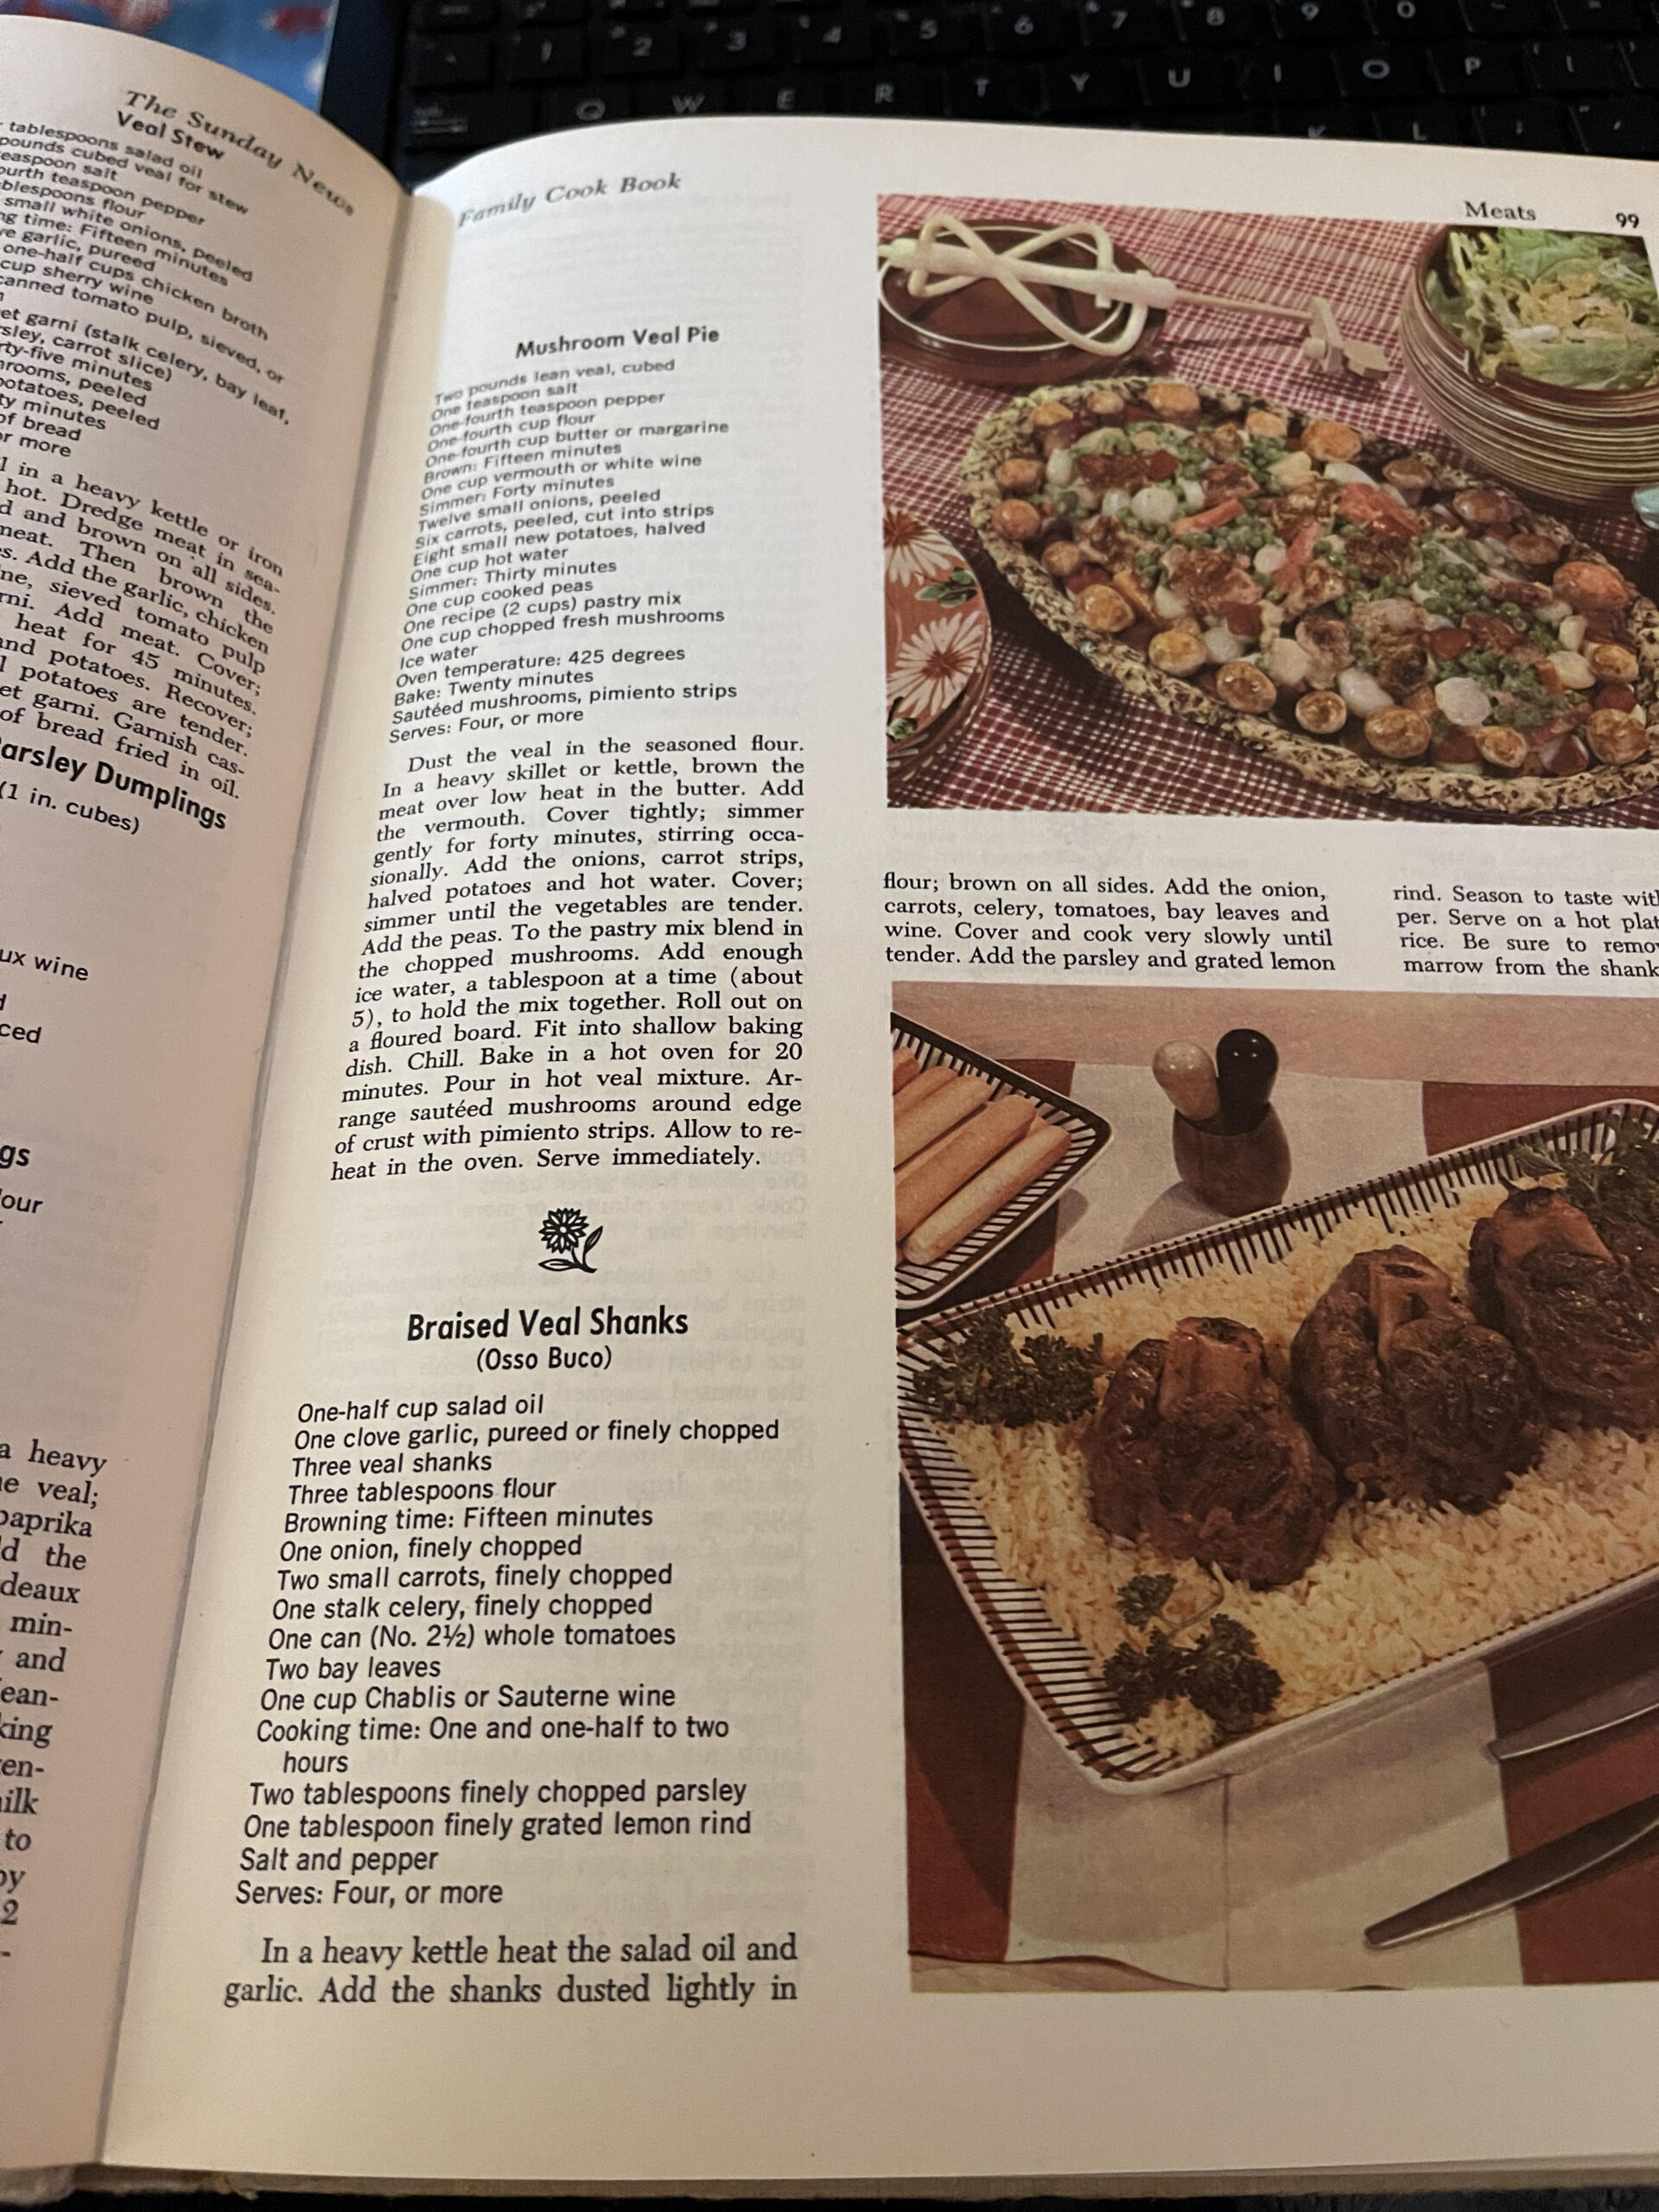 https://vintagecookbook.com/wp-content/uploads/2015/12/Sunday-News-Family-Cook-Book-1962-in-near-mint-condition-2-scaled.jpg